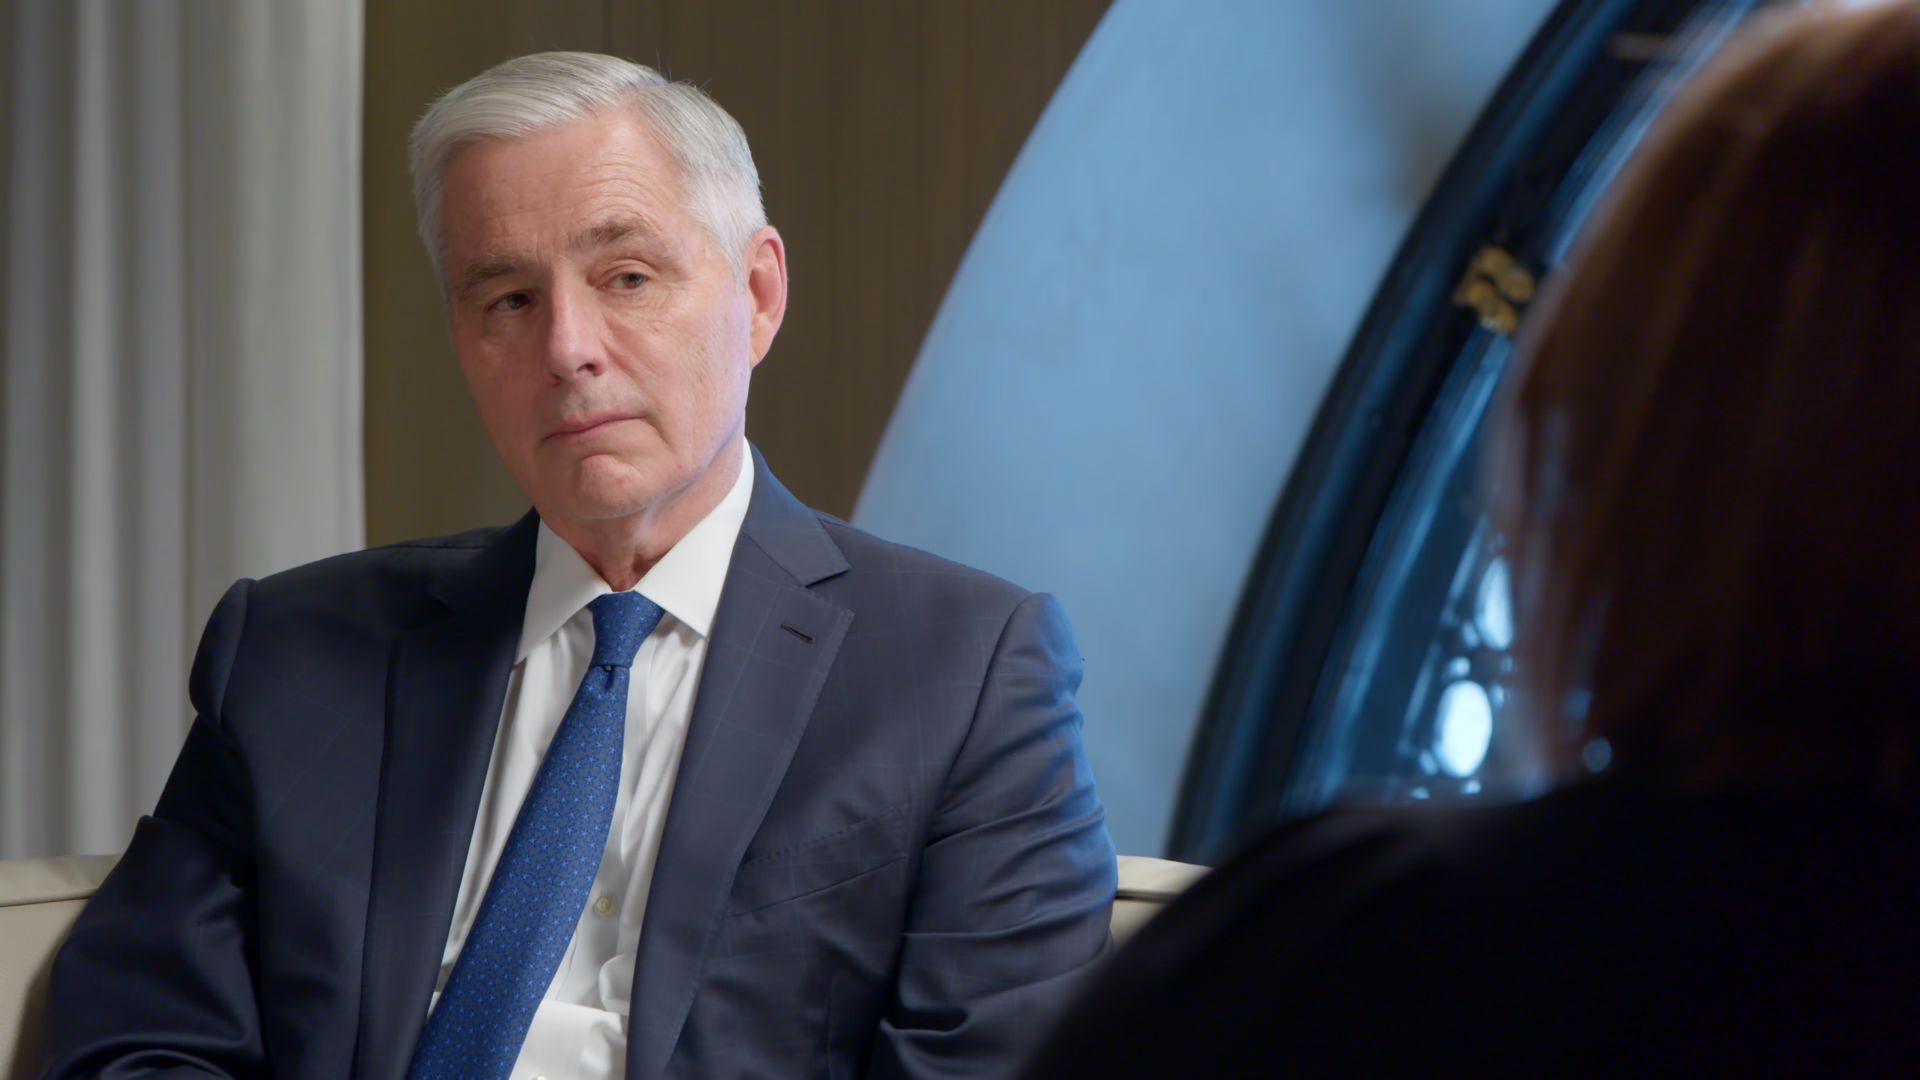 Amtrak CEO Bill Flynn is seen during an interview with "Axios on HBO."